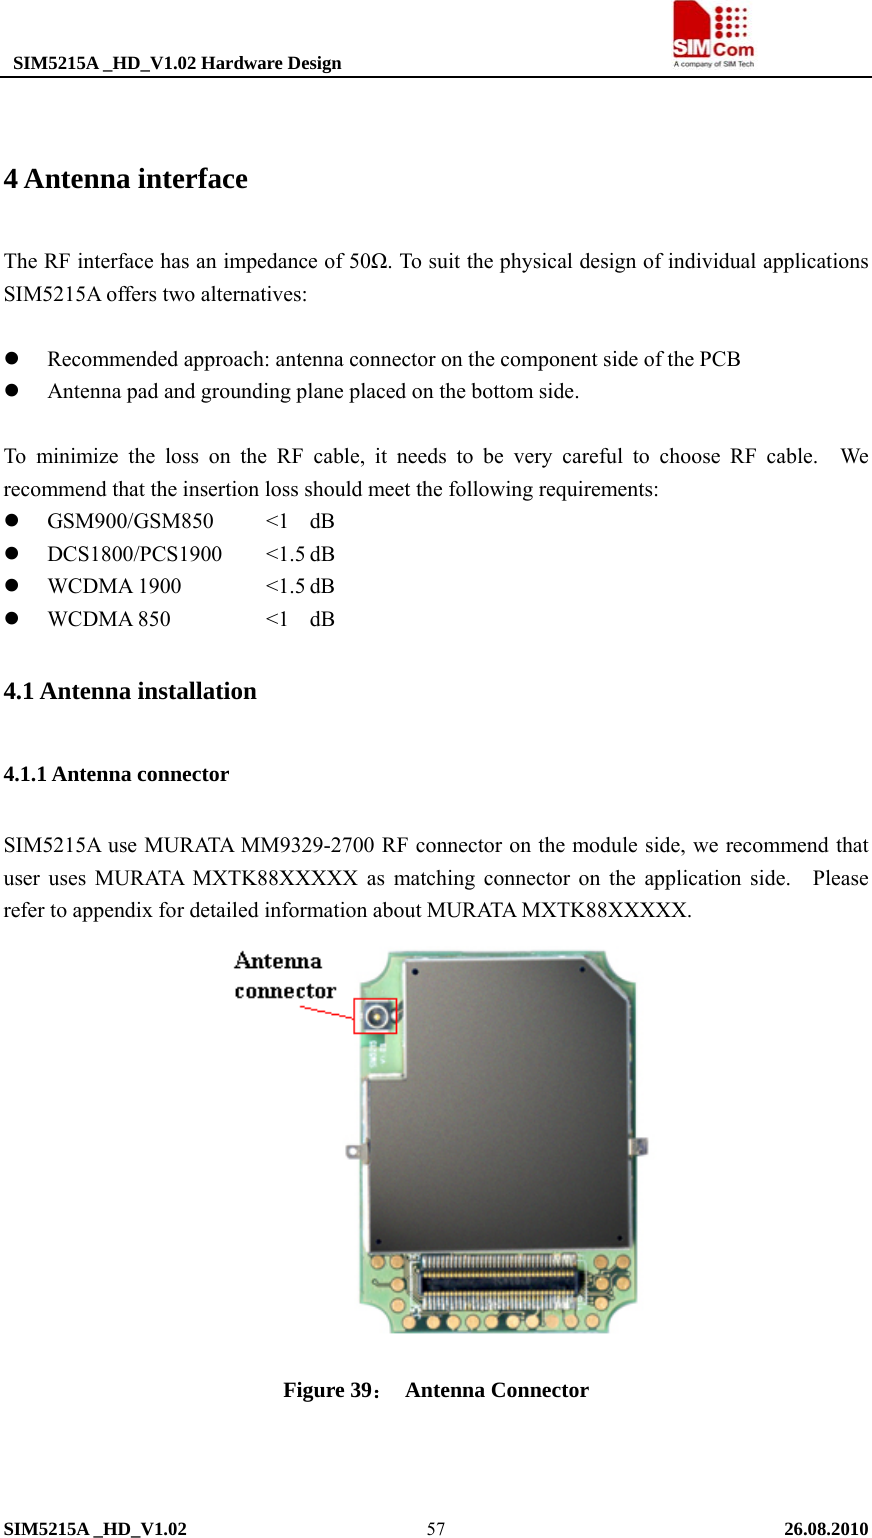  SIM5215A _HD_V1.02 Hardware Design                                     SIM5215A _HD_V1.02   26.08.2010   57 4 Antenna interface The RF interface has an impedance of 50Ω. To suit the physical design of individual applications SIM5215A offers two alternatives:  z Recommended approach: antenna connector on the component side of the PCB   z Antenna pad and grounding plane placed on the bottom side.    To minimize the loss on the RF cable, it needs to be very careful to choose RF cable.  We recommend that the insertion loss should meet the following requirements: z GSM900/GSM850   &lt;1  dB z DCS1800/PCS1900   &lt;1.5 dB z WCDMA 1900    &lt;1.5 dB z WCDMA 850   &lt;1 dB 4.1 Antenna installation 4.1.1 Antenna connector SIM5215A use MURATA MM9329-2700 RF connector on the module side, we recommend that user uses MURATA MXTK88XXXXX as matching connector on the application side.   Please refer to appendix for detailed information about MURATA MXTK88XXXXX.    Figure 39： Antenna Connector   